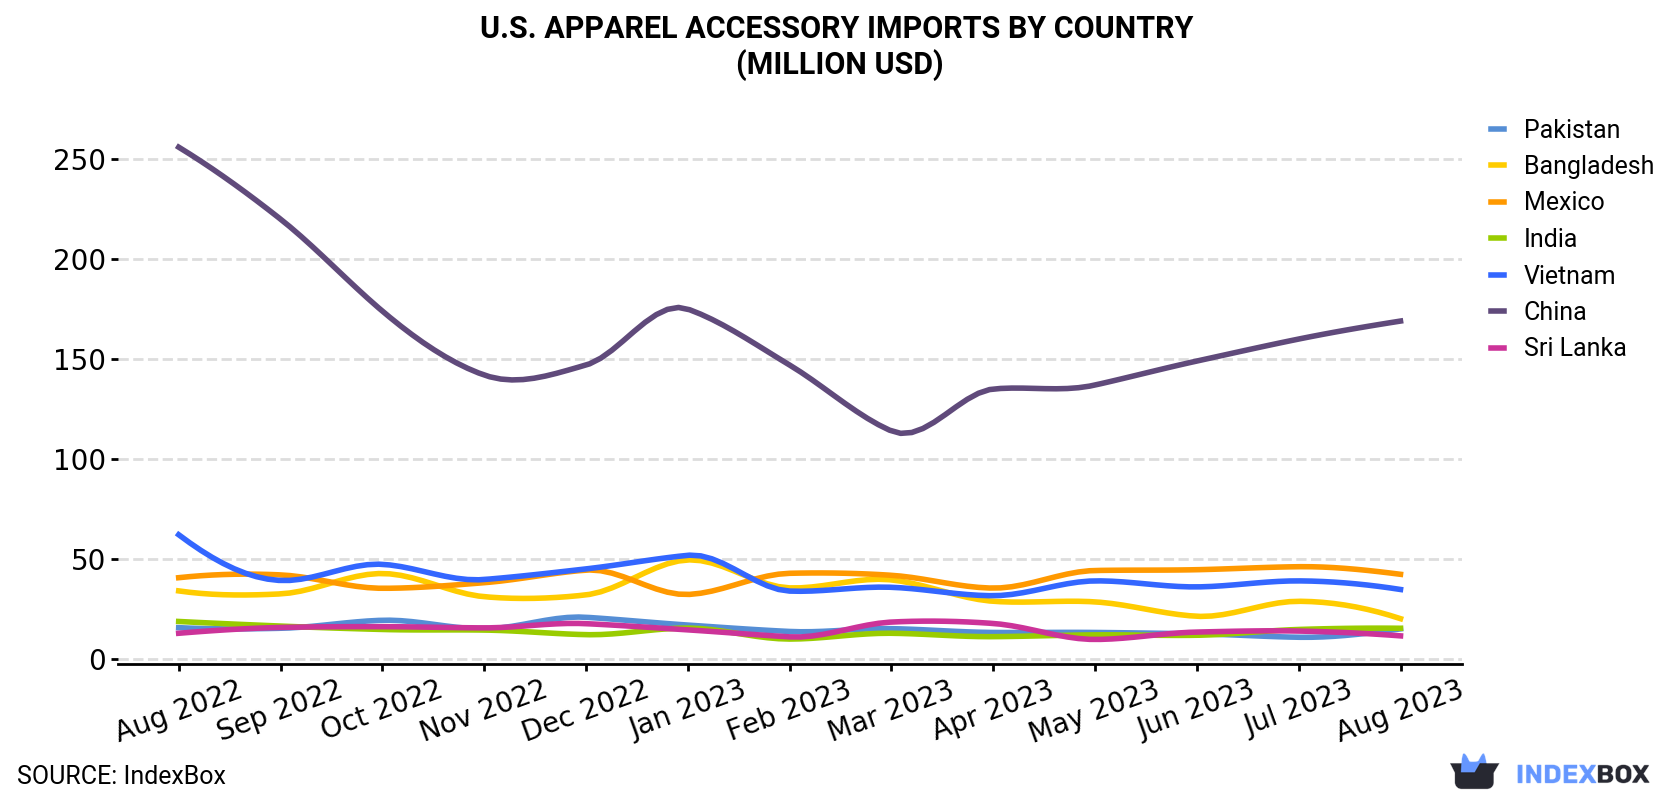 U.S. Apparel Accessory Imports By Country (Million USD)